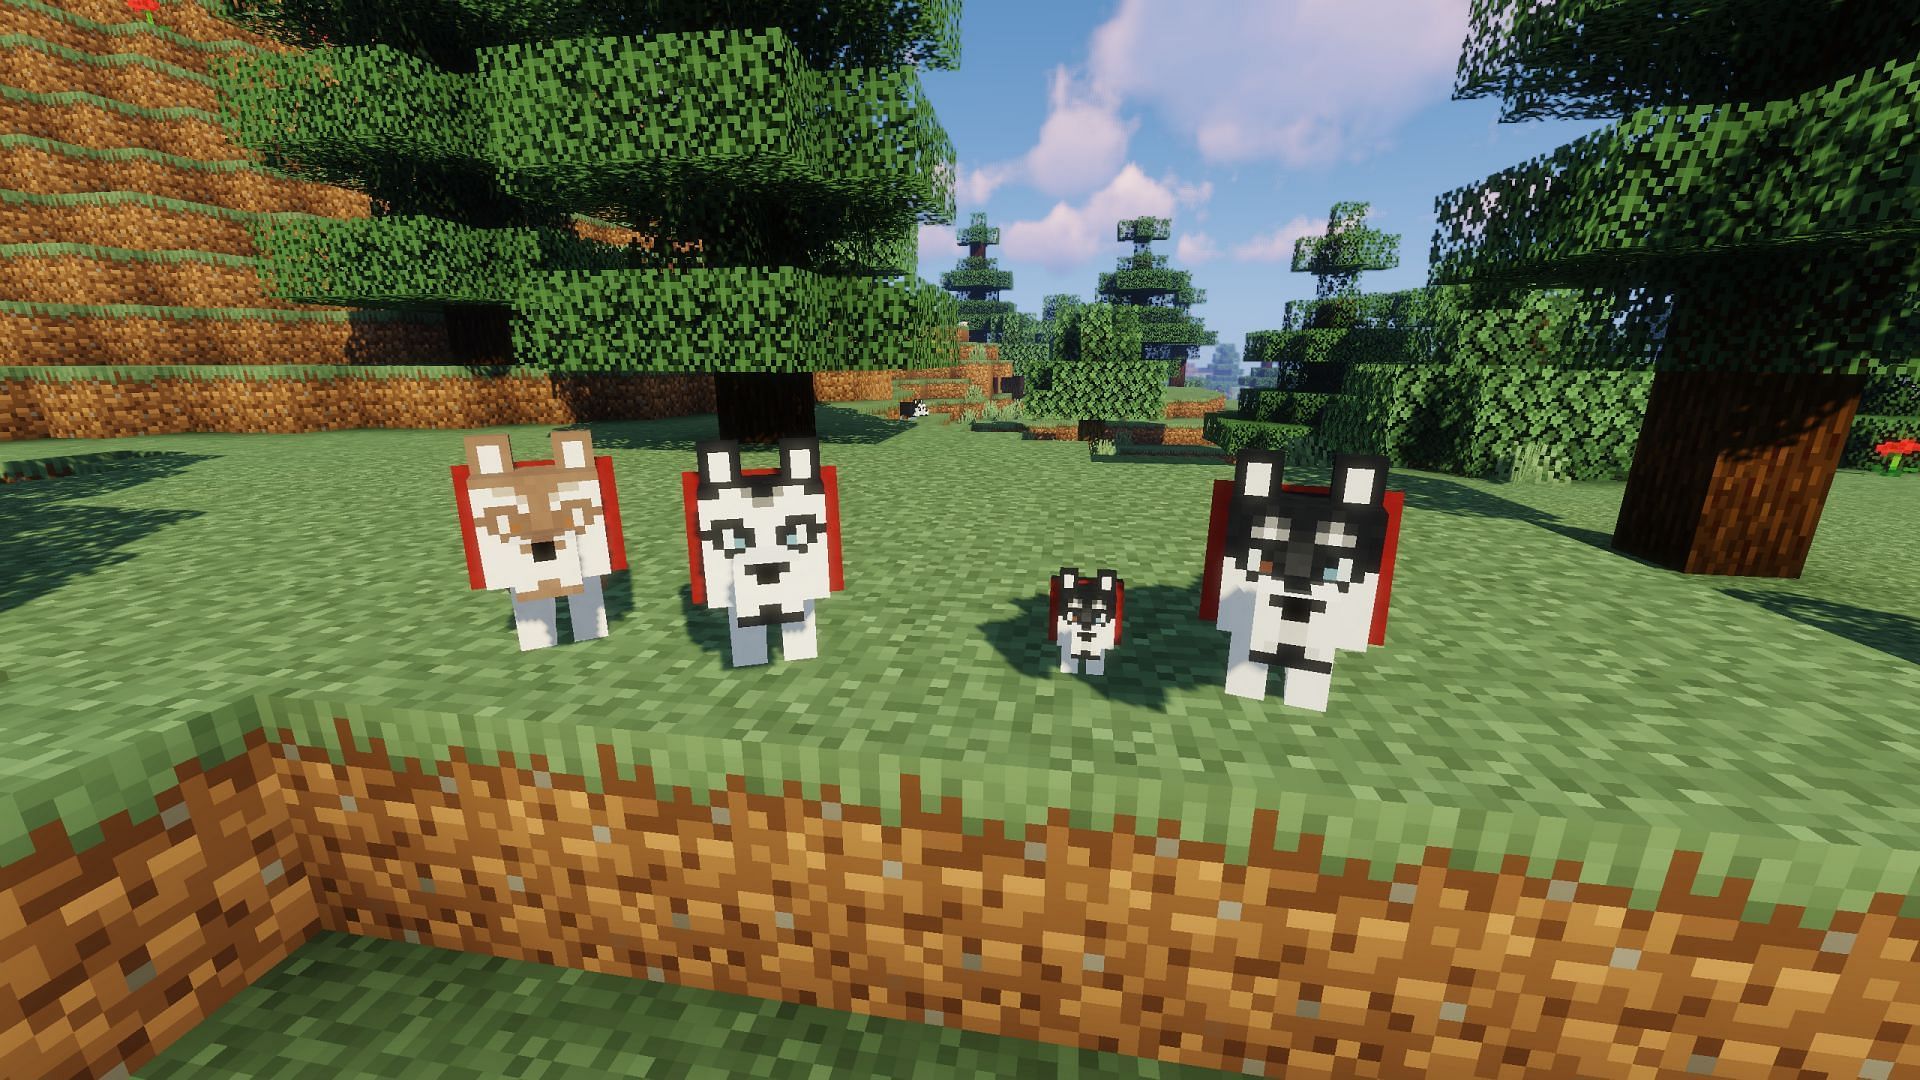 There are only a few dog mods and resource packs for Minecraft 1.19 (Image via CurseForge)